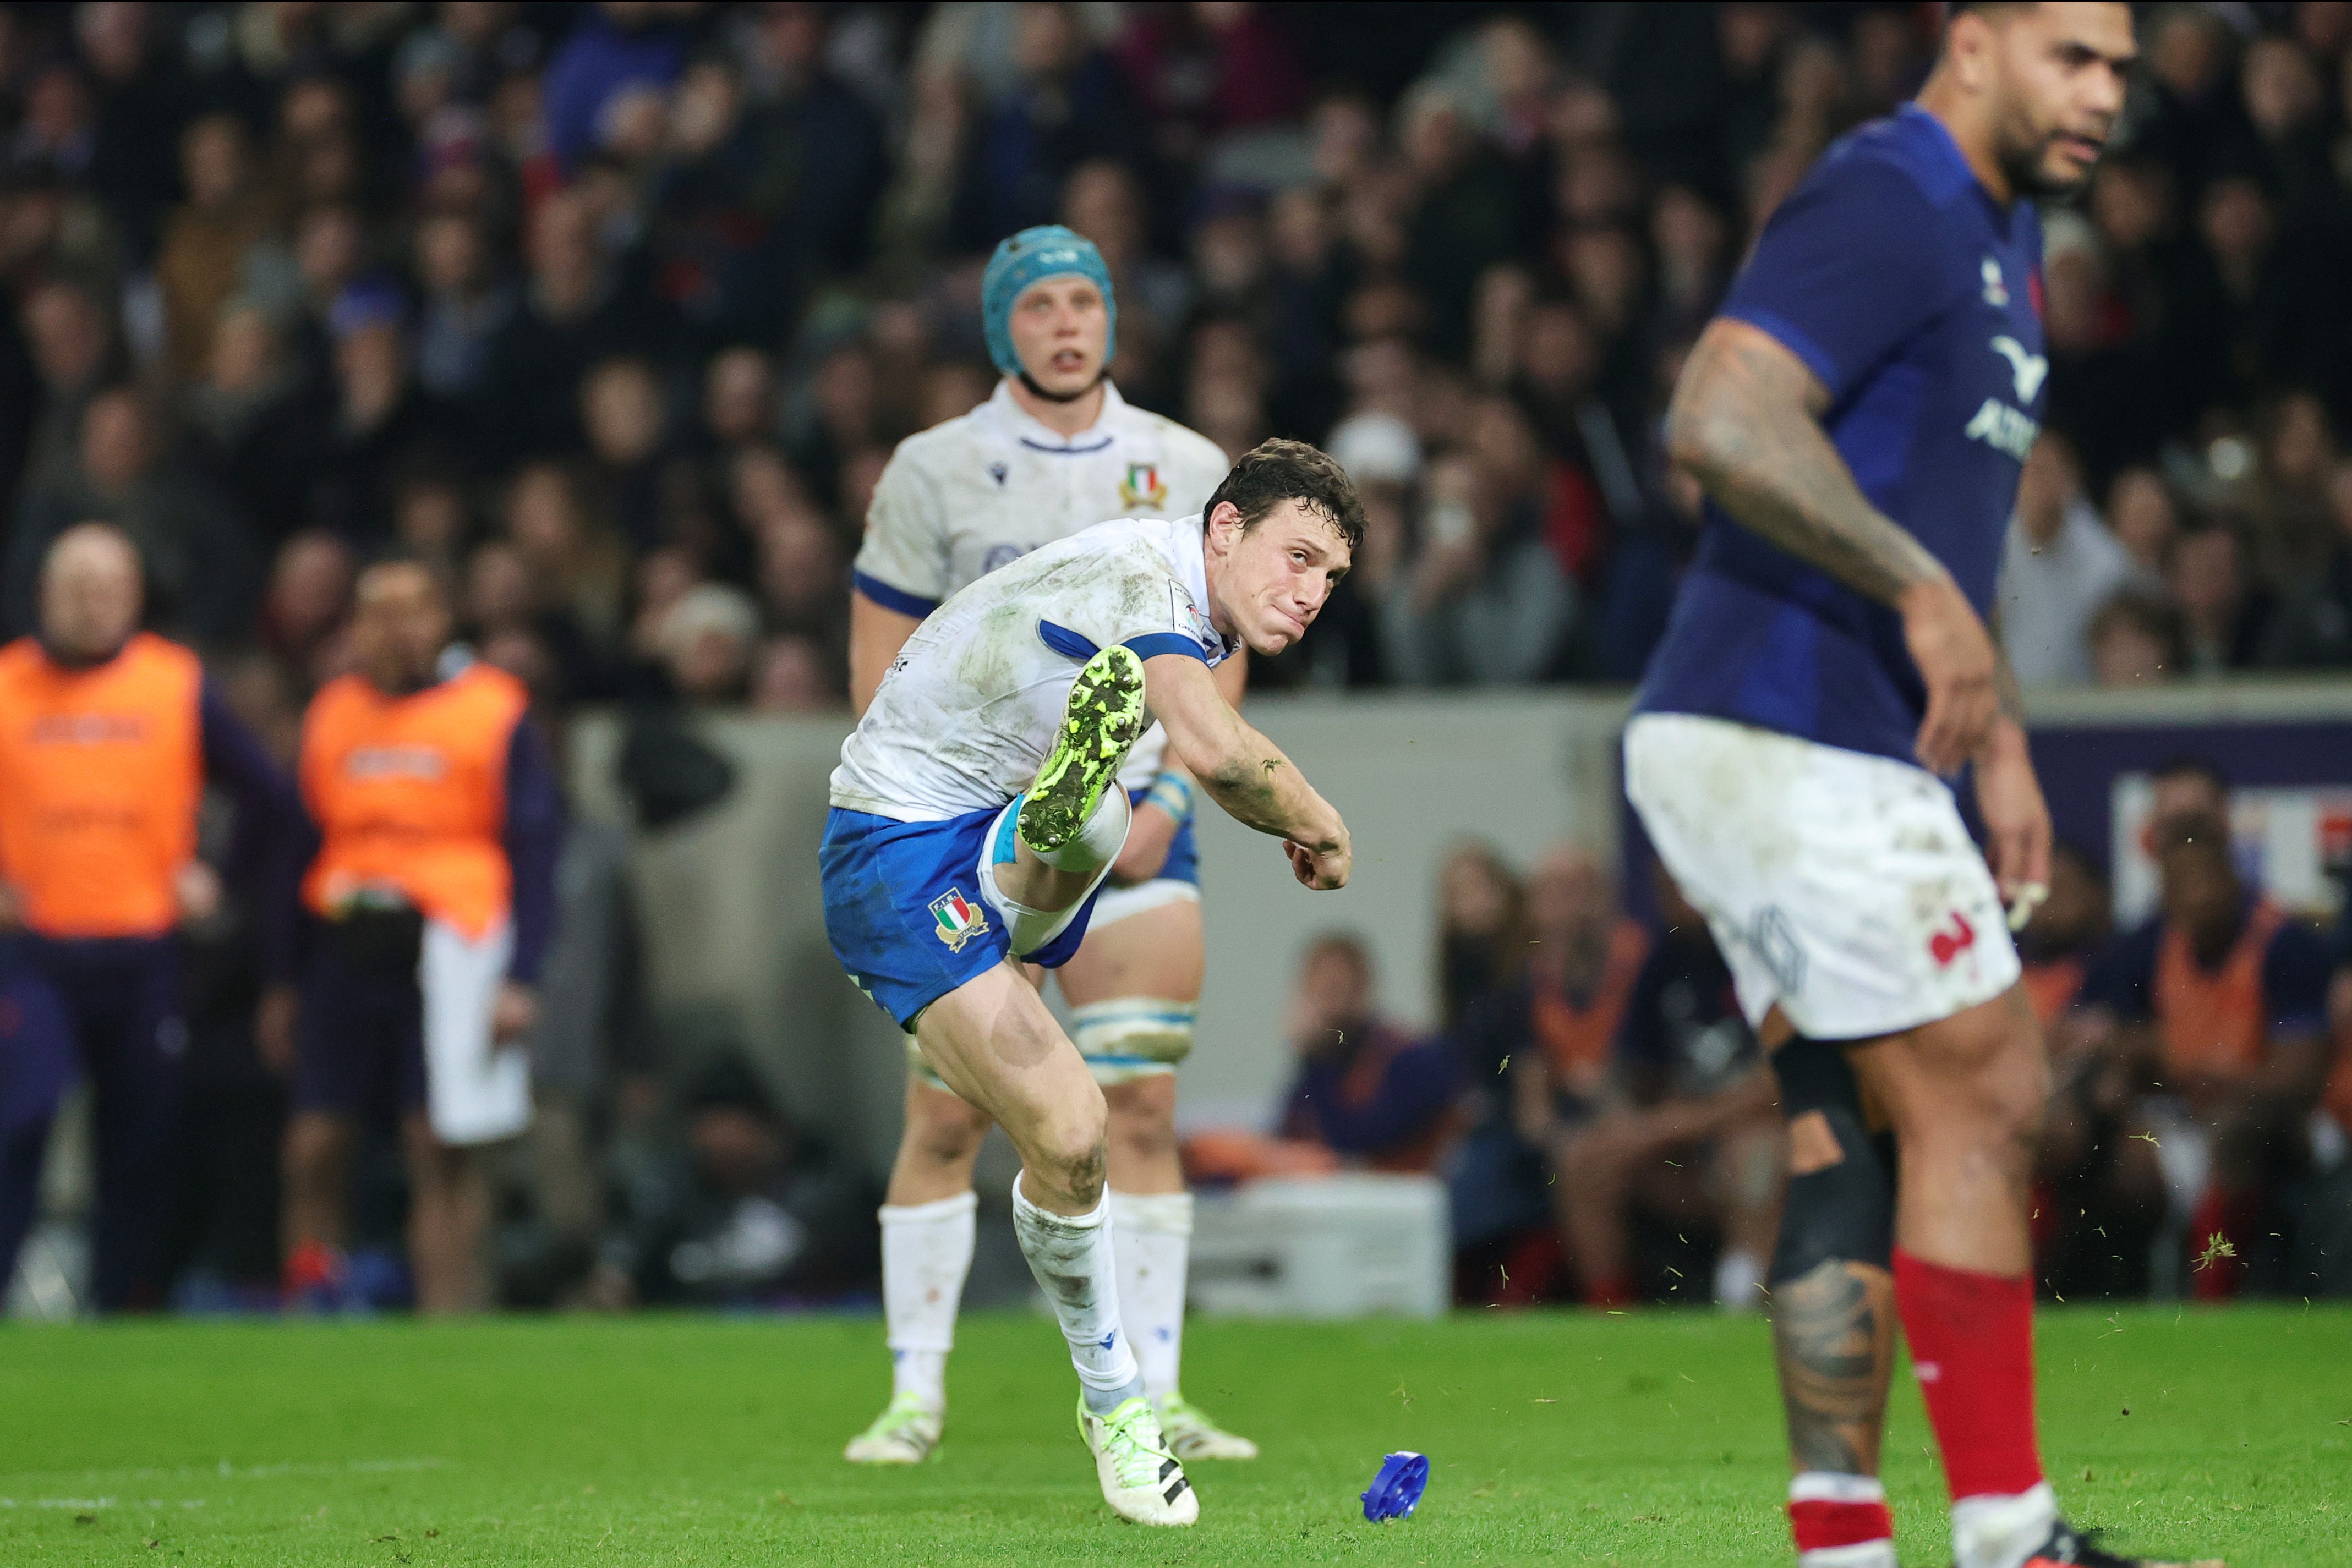 Italy were inches away from a famous victory against France